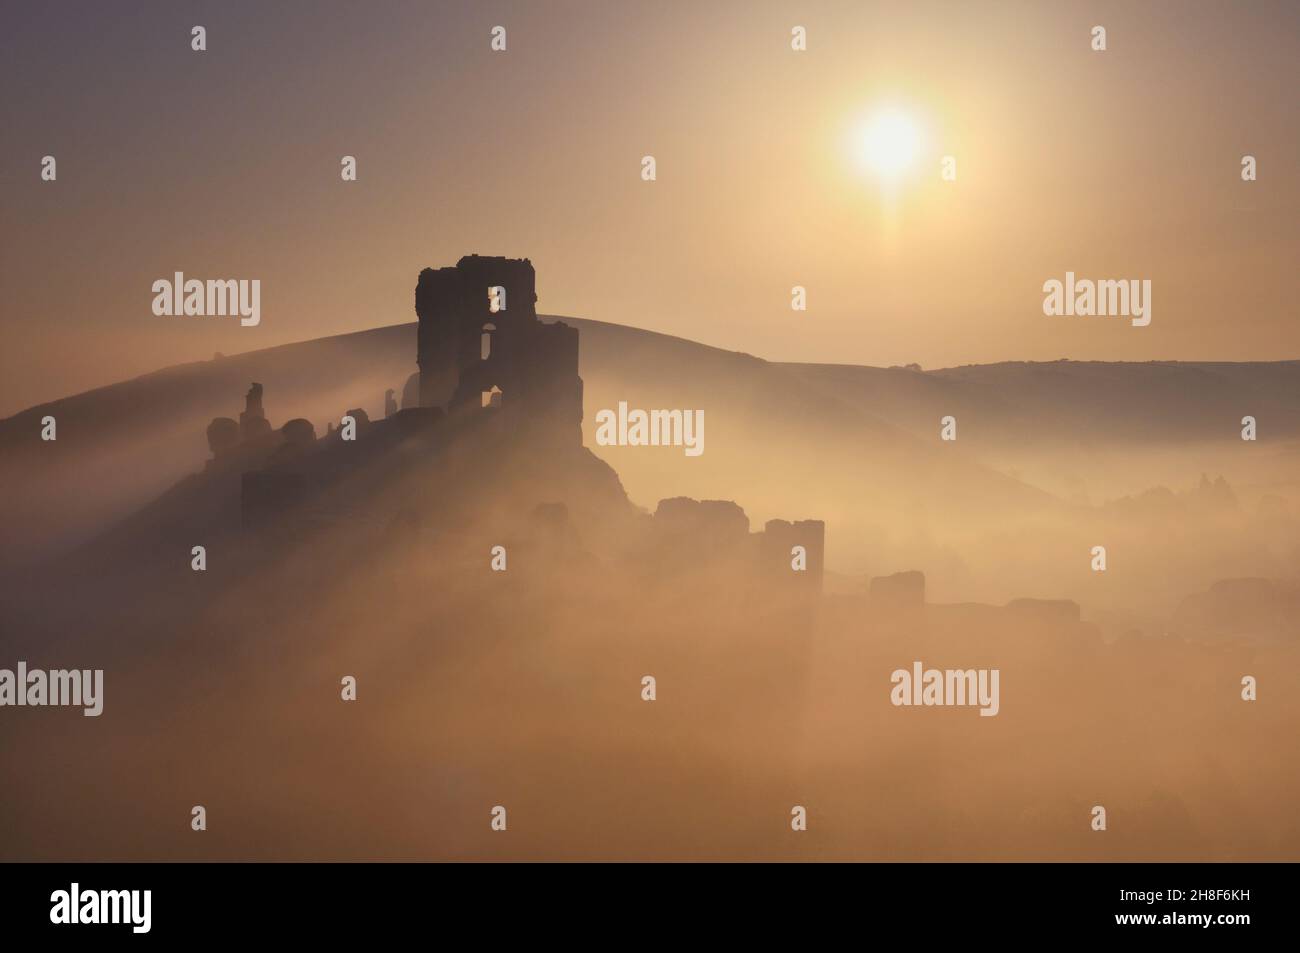 The dramatic 11th century ruins of Corfe Castle shrouded in mist at sunrise, Isle of Purbeck, Dorset, England, UK Stock Photo